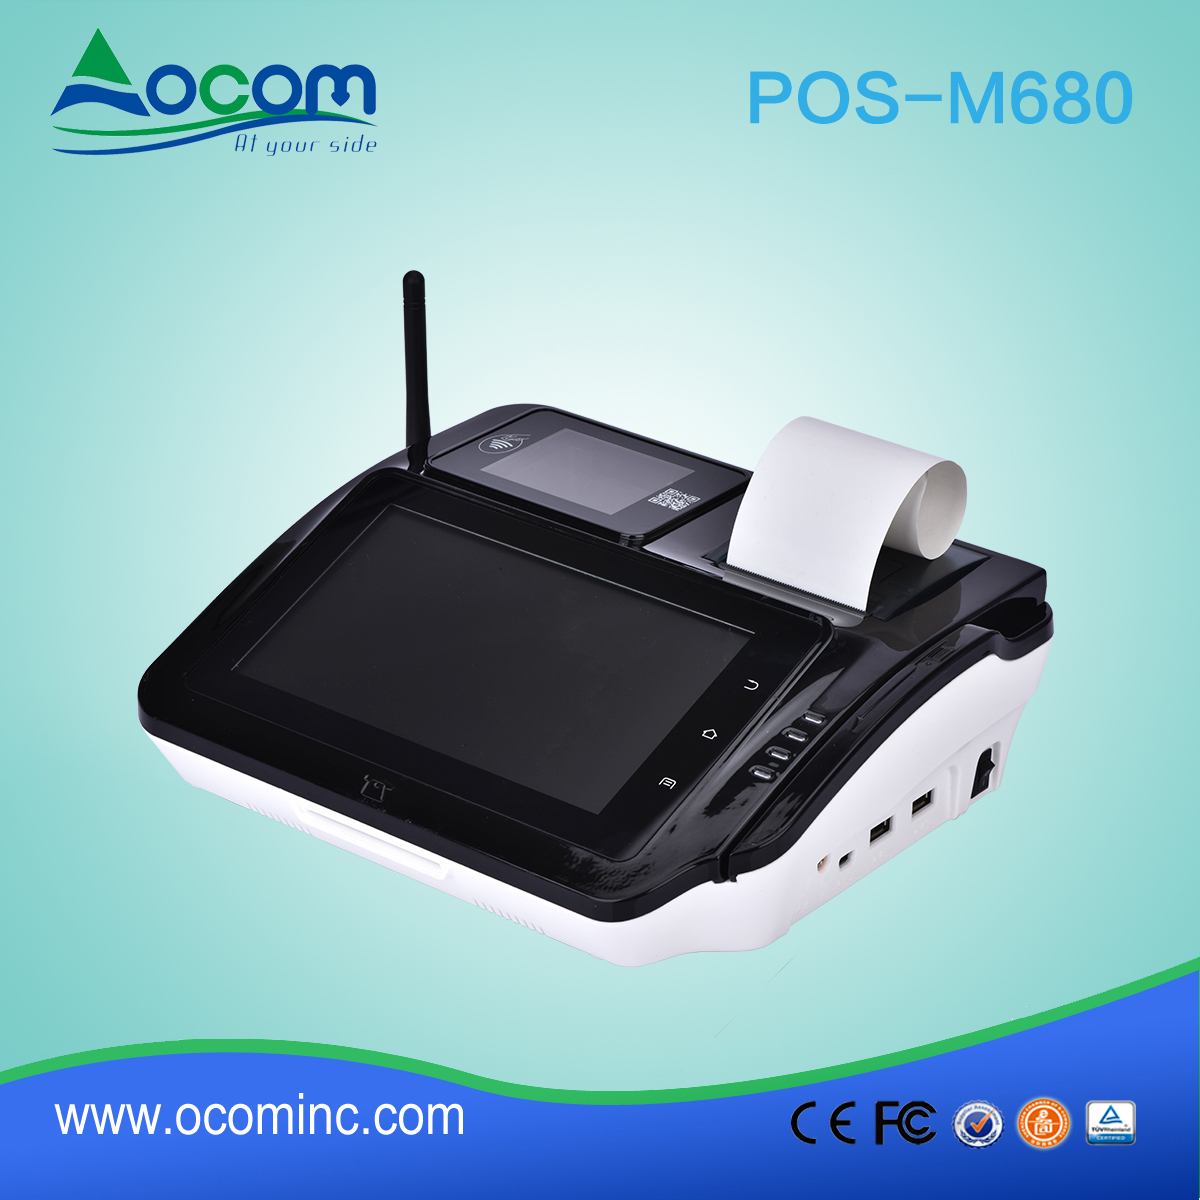 POS-M680 Tablet POS Terminal Android all-in-One-PC